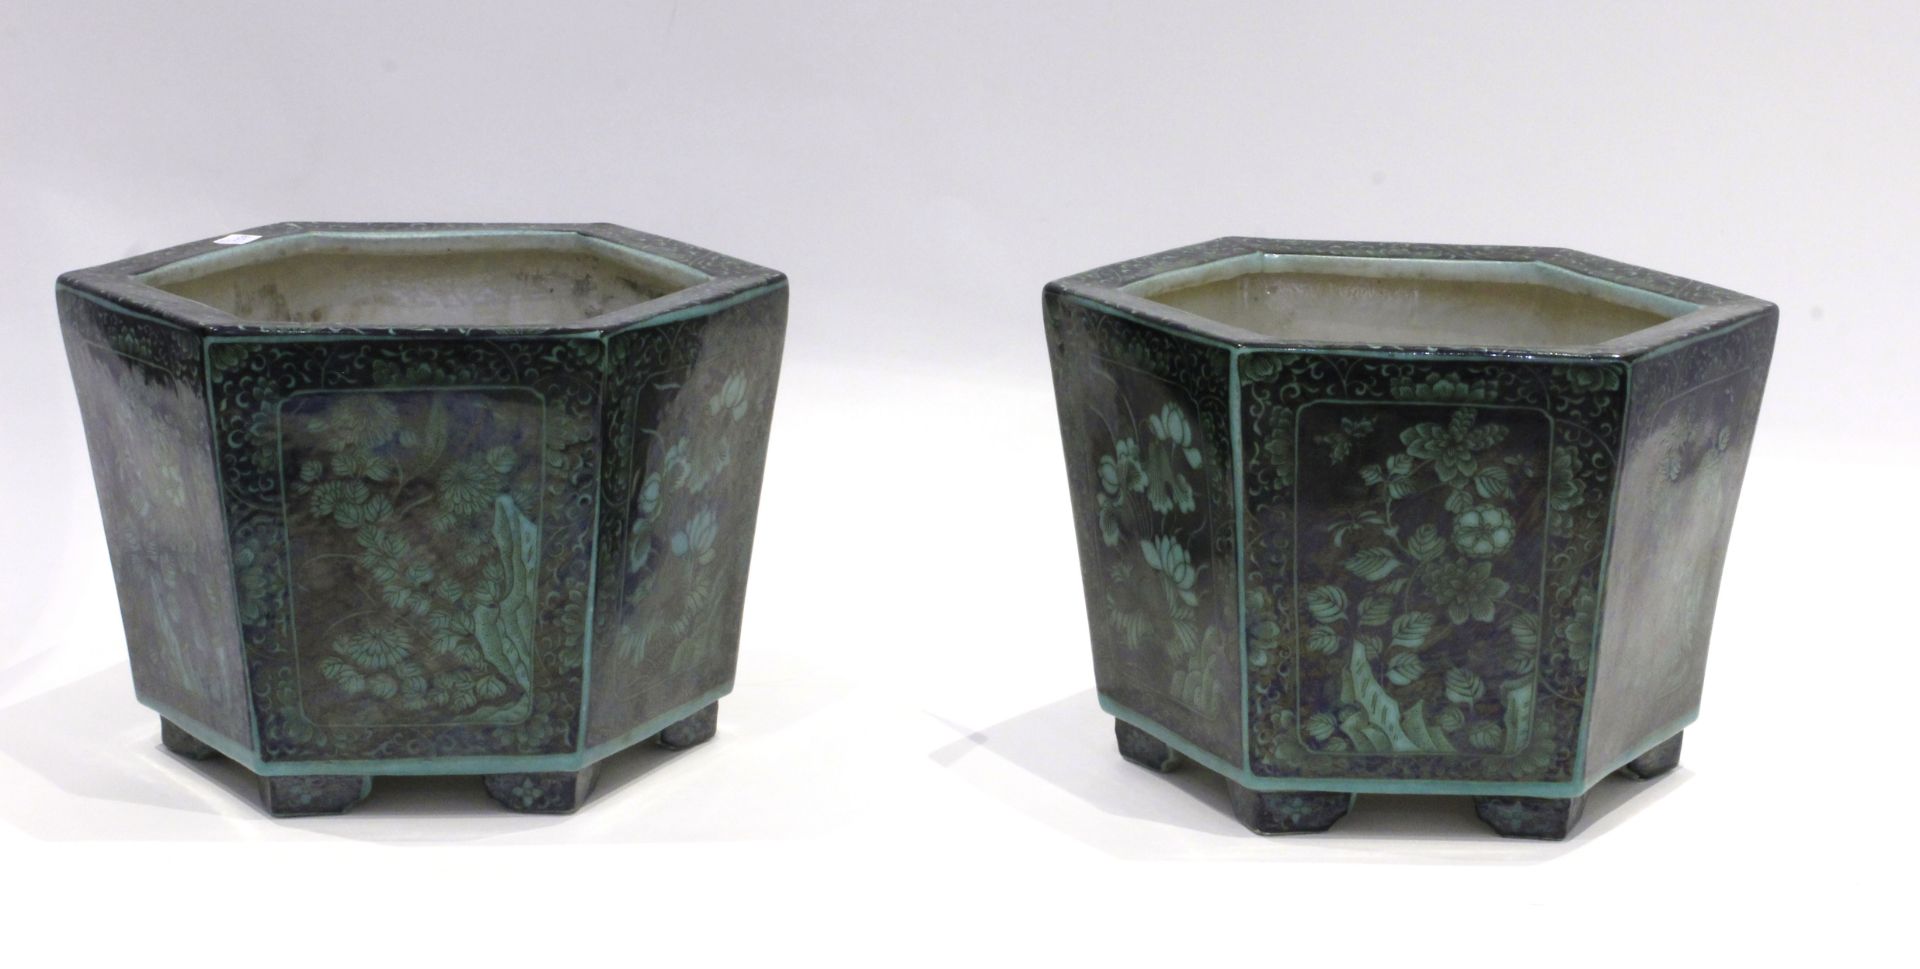 A pair of late 19th century Chinese cache-pots in Famille Noir porcelain - Image 5 of 9